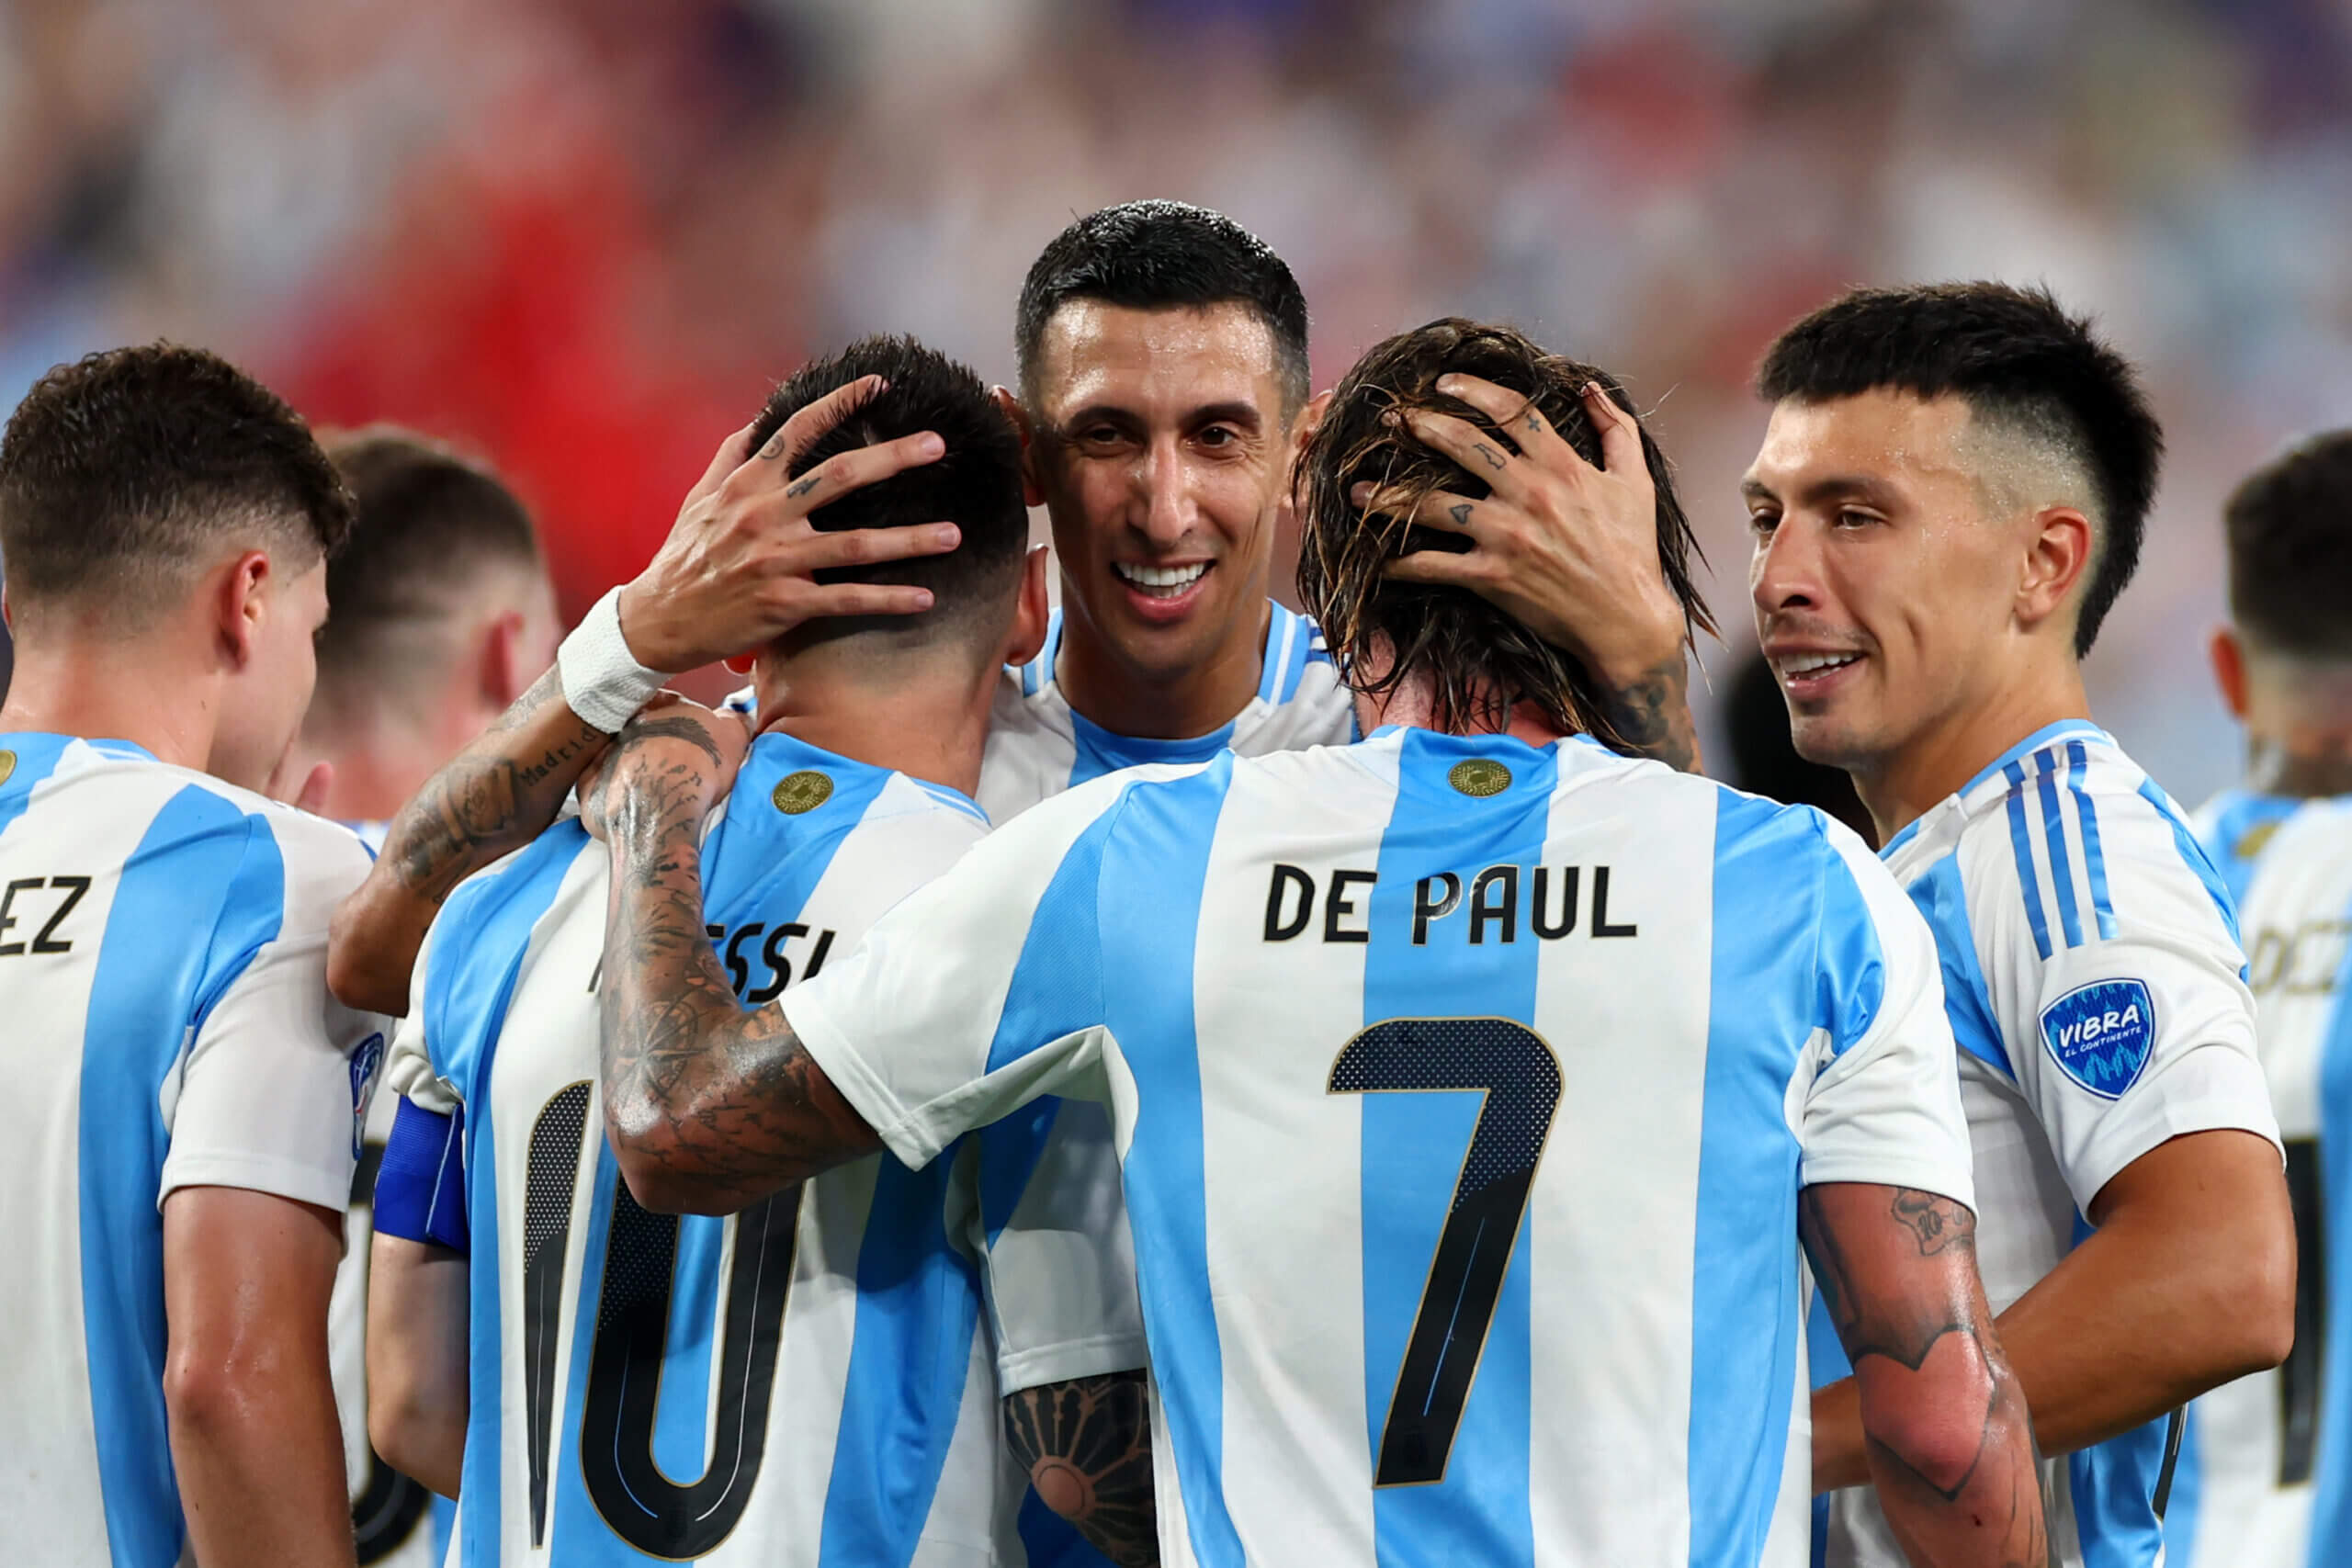 Lionel Messi and Argentina are looking forward to having their greatest national team of all time